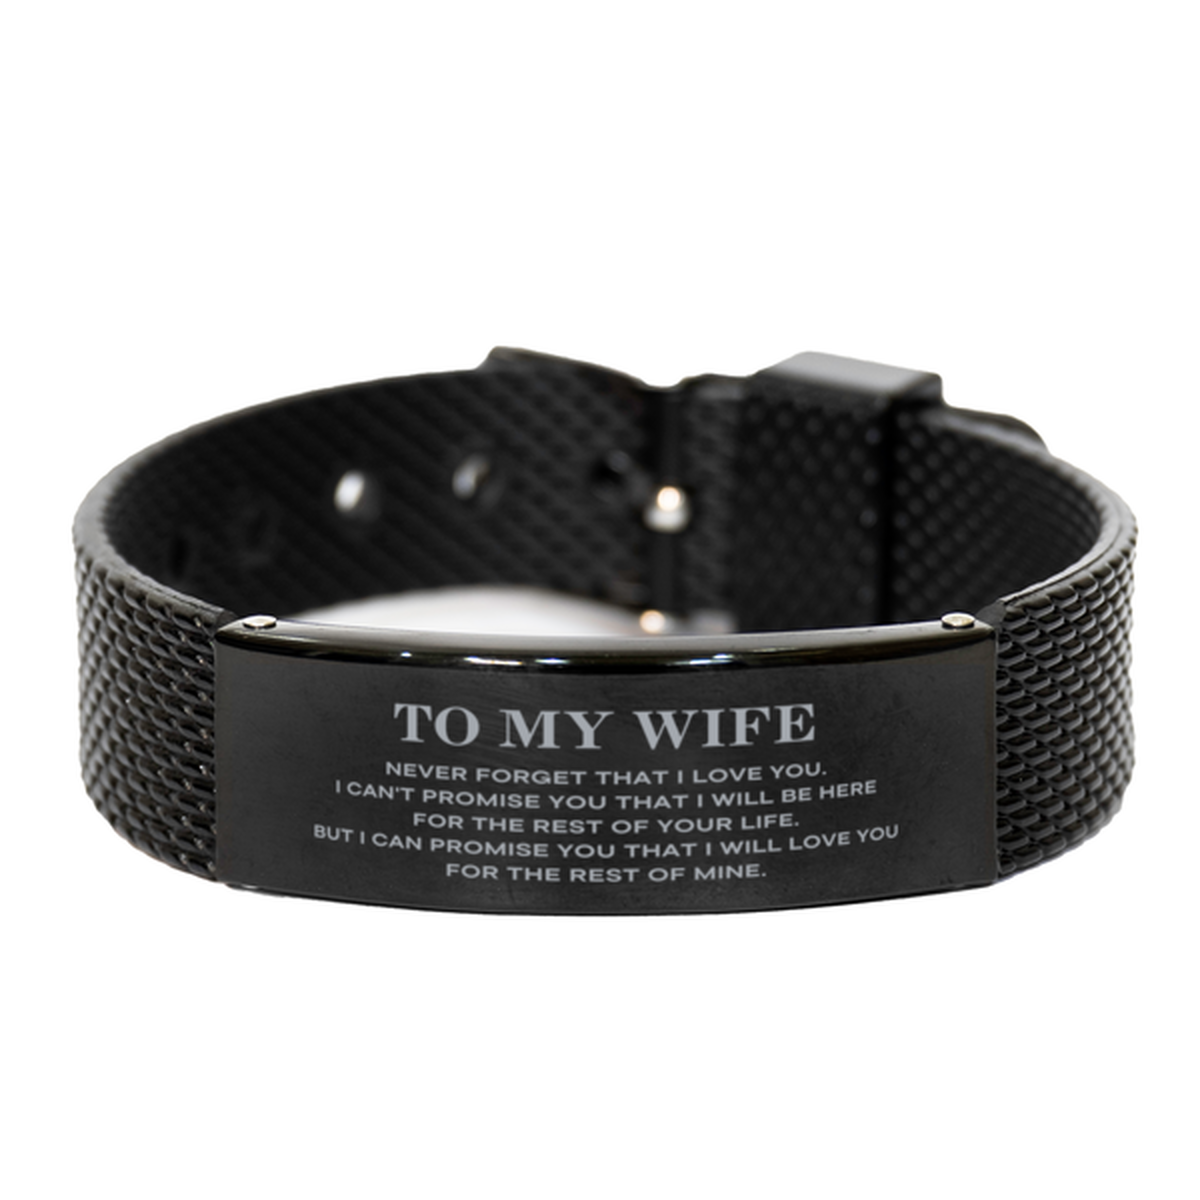 To My Wife Gifts, I will love you for the rest of mine, Love Wife Bracelet, Birthday Christmas Unique Black Shark Mesh Bracelet For Wife